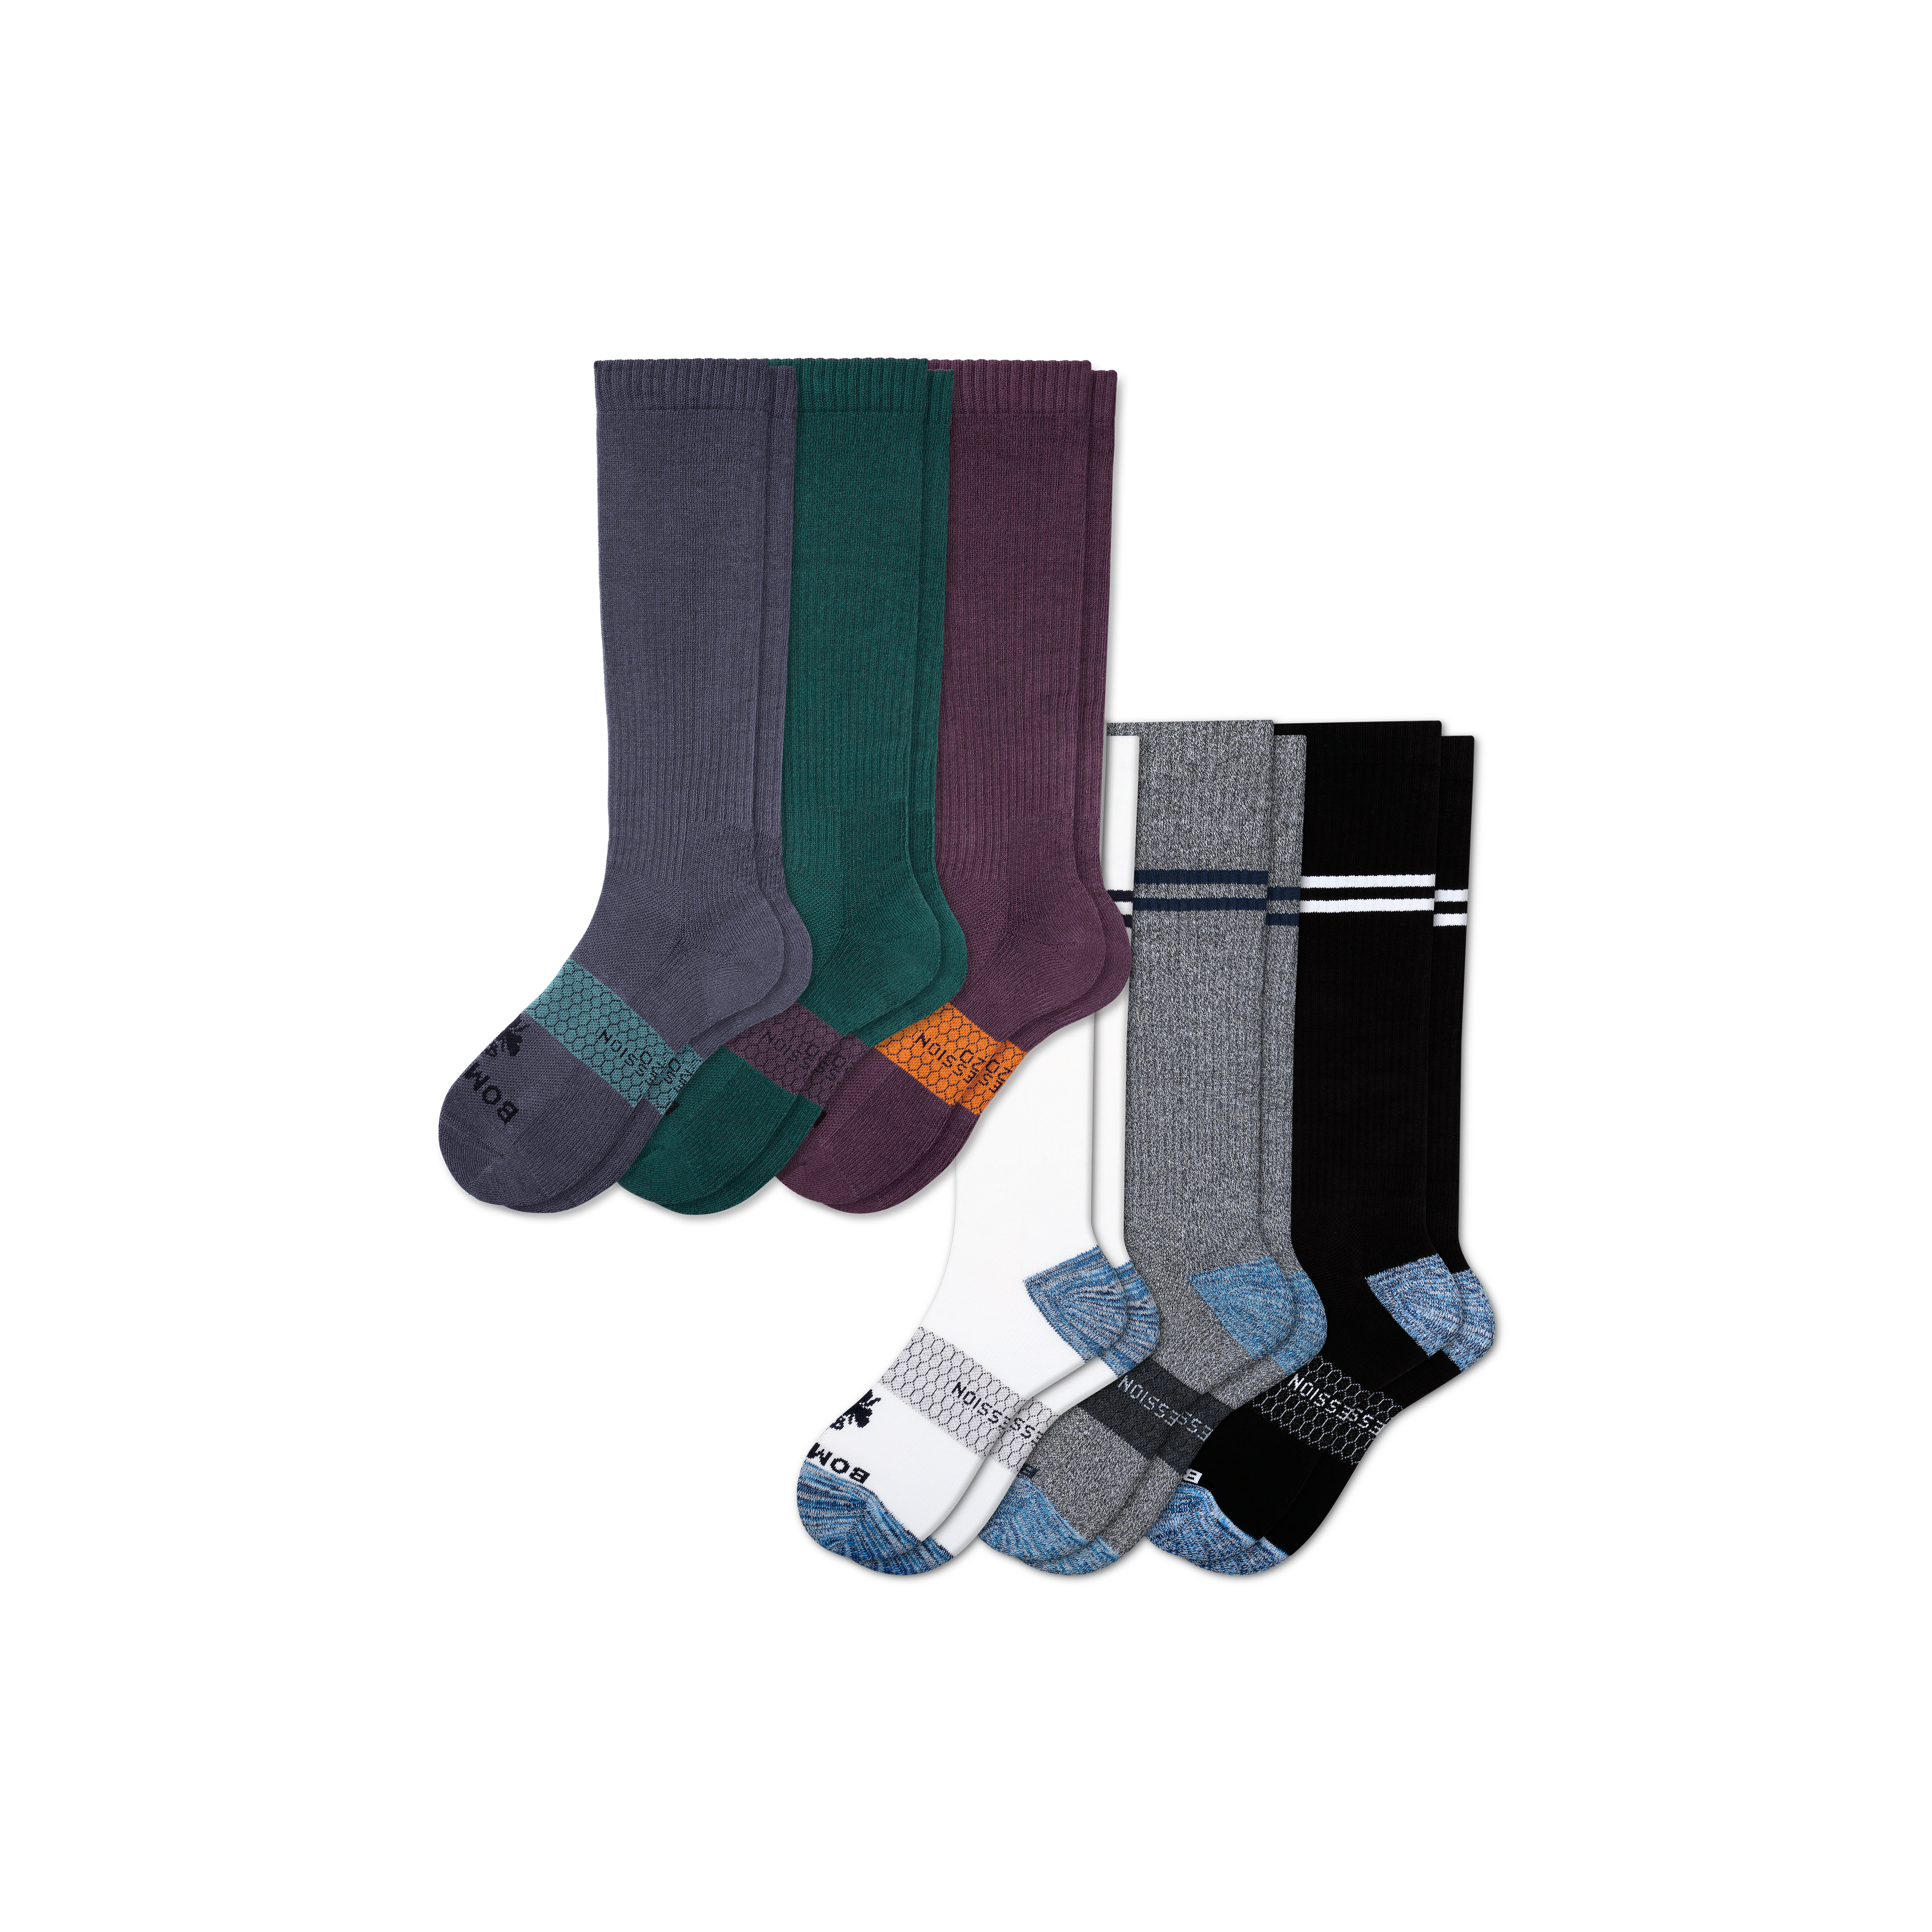 Bombas Everyday Compression Sock 6-pack (15-20mmhg) In Galaxy Teal Mix